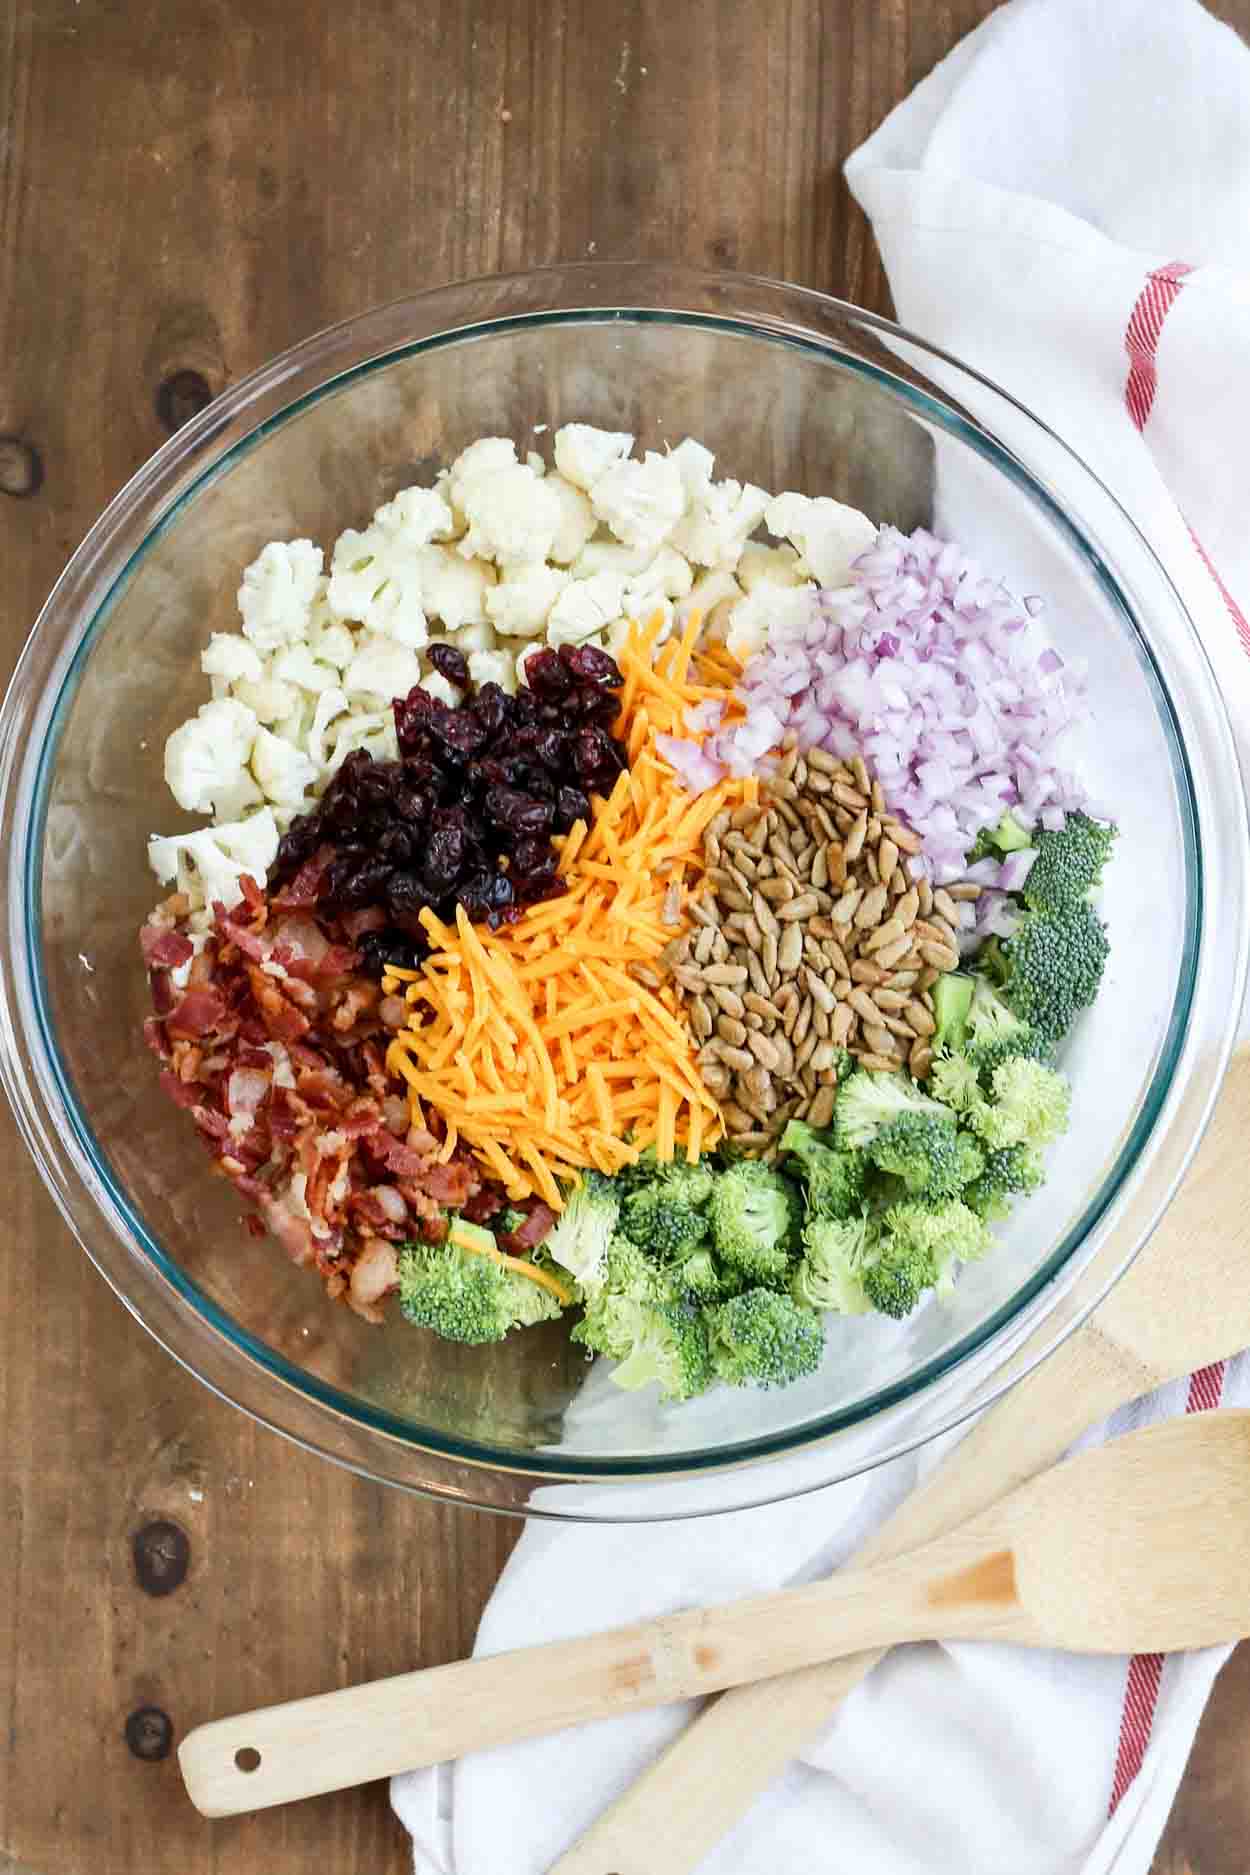 Simple cauliflower broccoli salad recipe in a bowl with cheese, onions, craisins, sunflower seeds, and bacon.